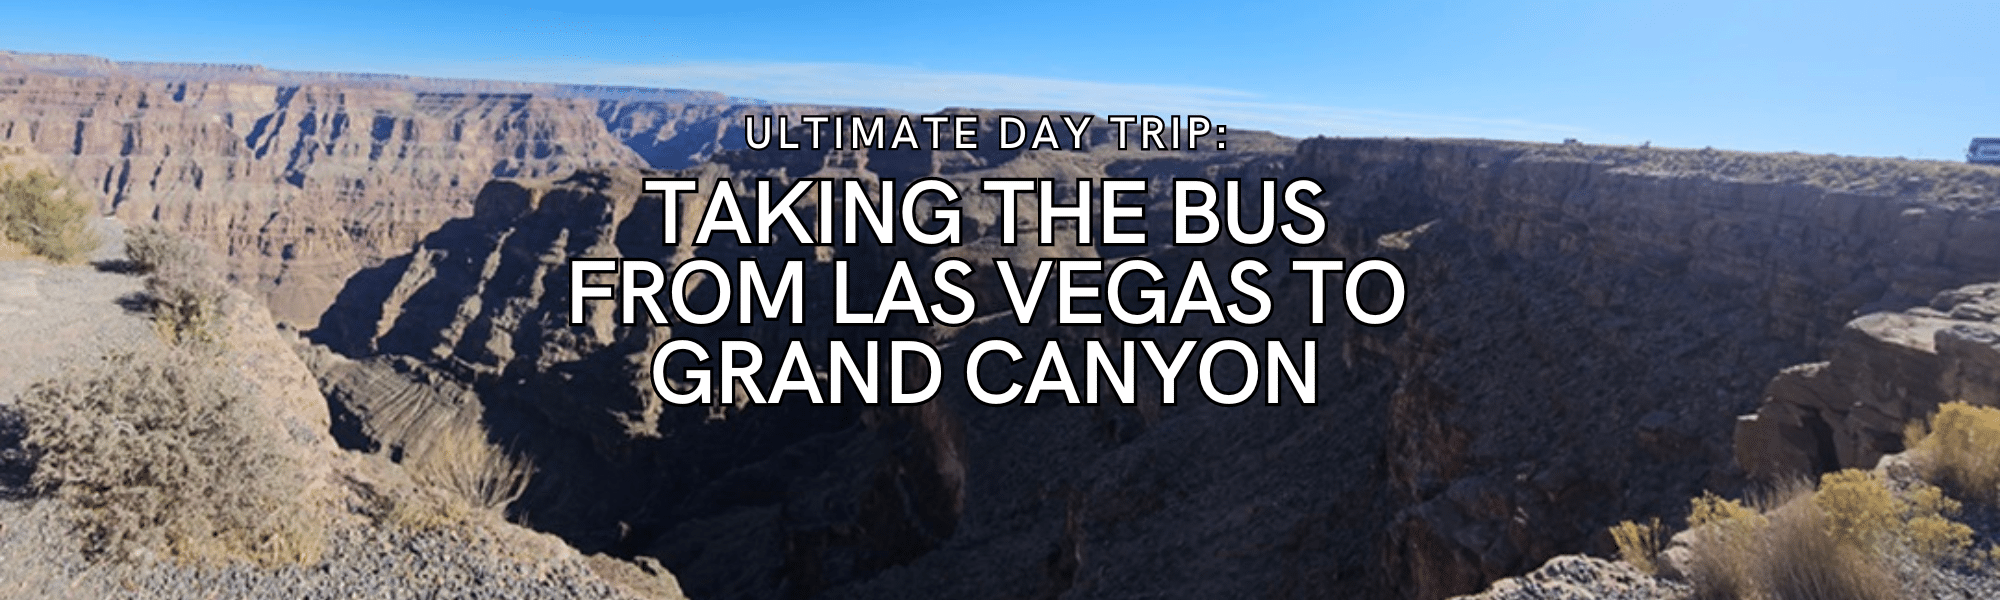 Bus from Las Vegas to Grand Canyon